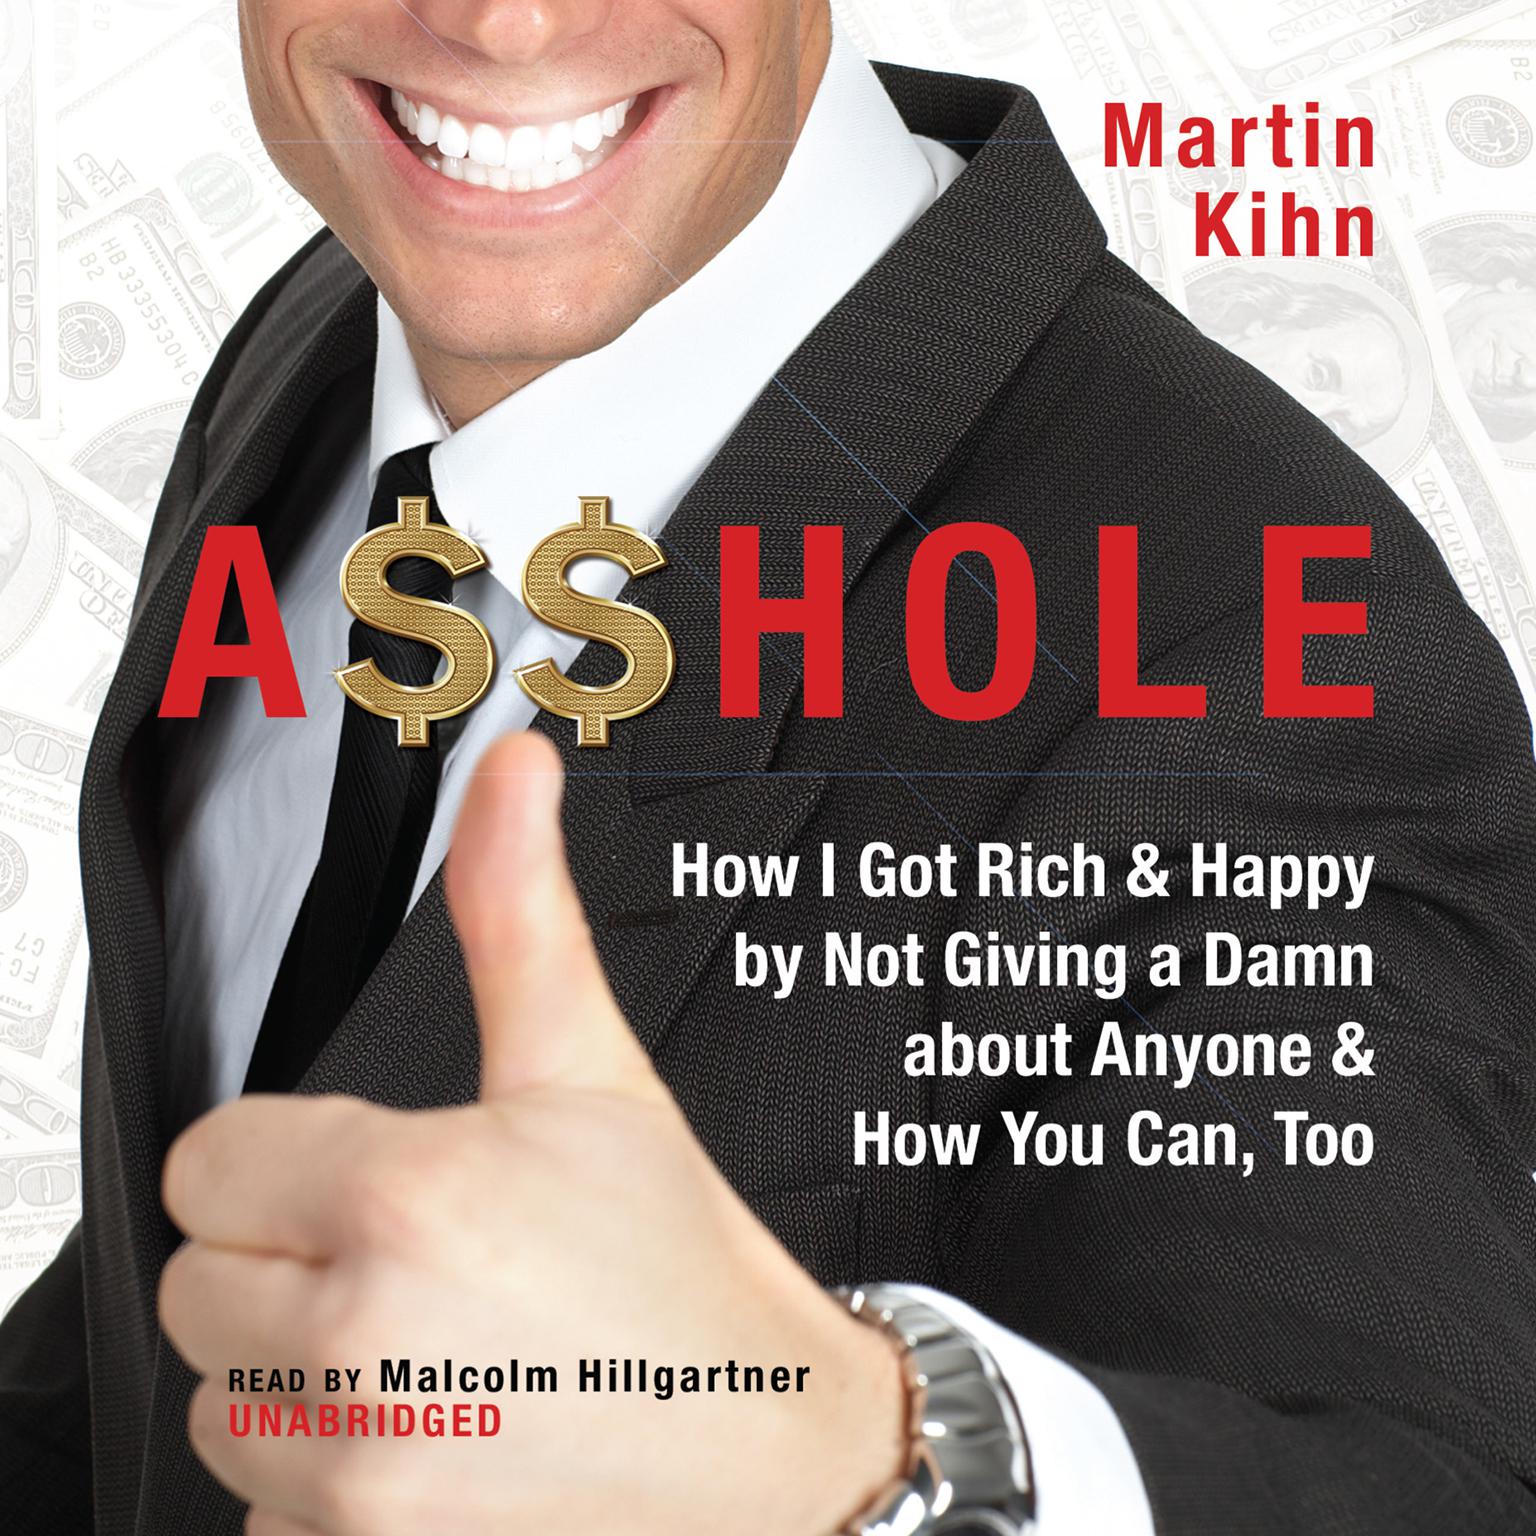 A$$hole: How I Got Rich & Happy by Not Giving a Damn about Anyone & How You Can, Too Audiobook, by Martin Kihn